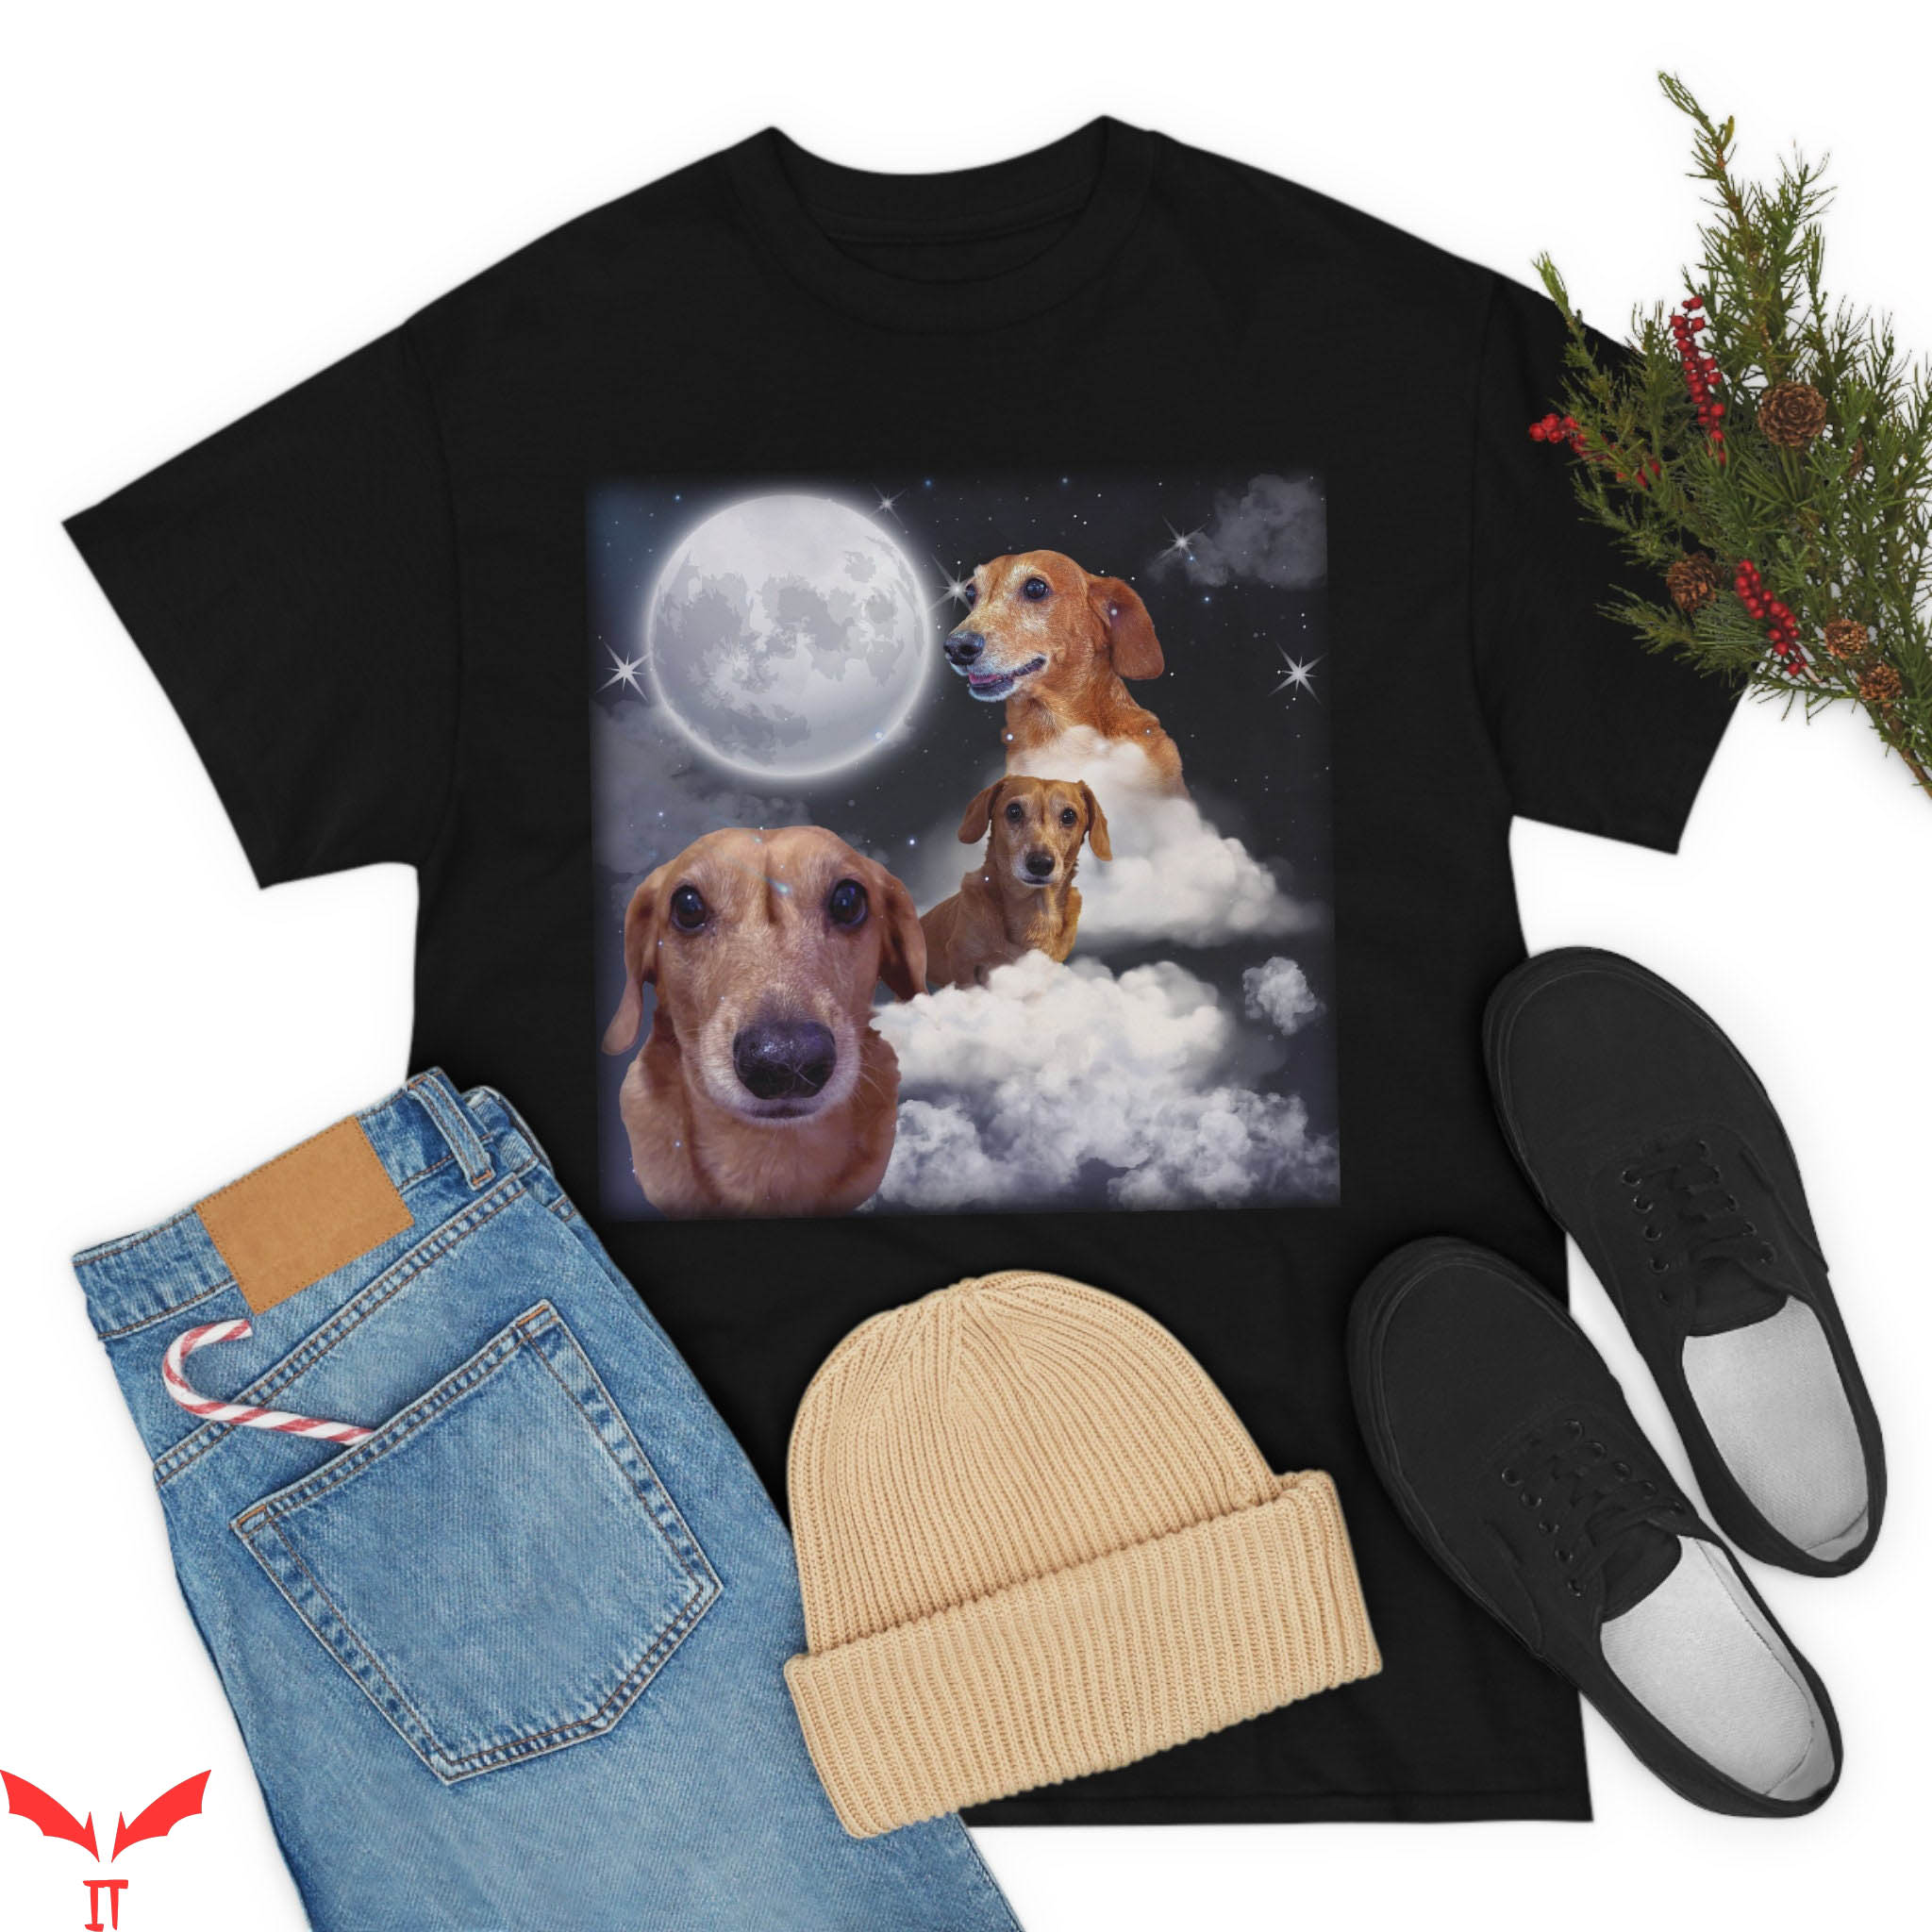 Dog Picture T-Shirt Dog Lovers Dog Dad Pet Space Tee Shirt